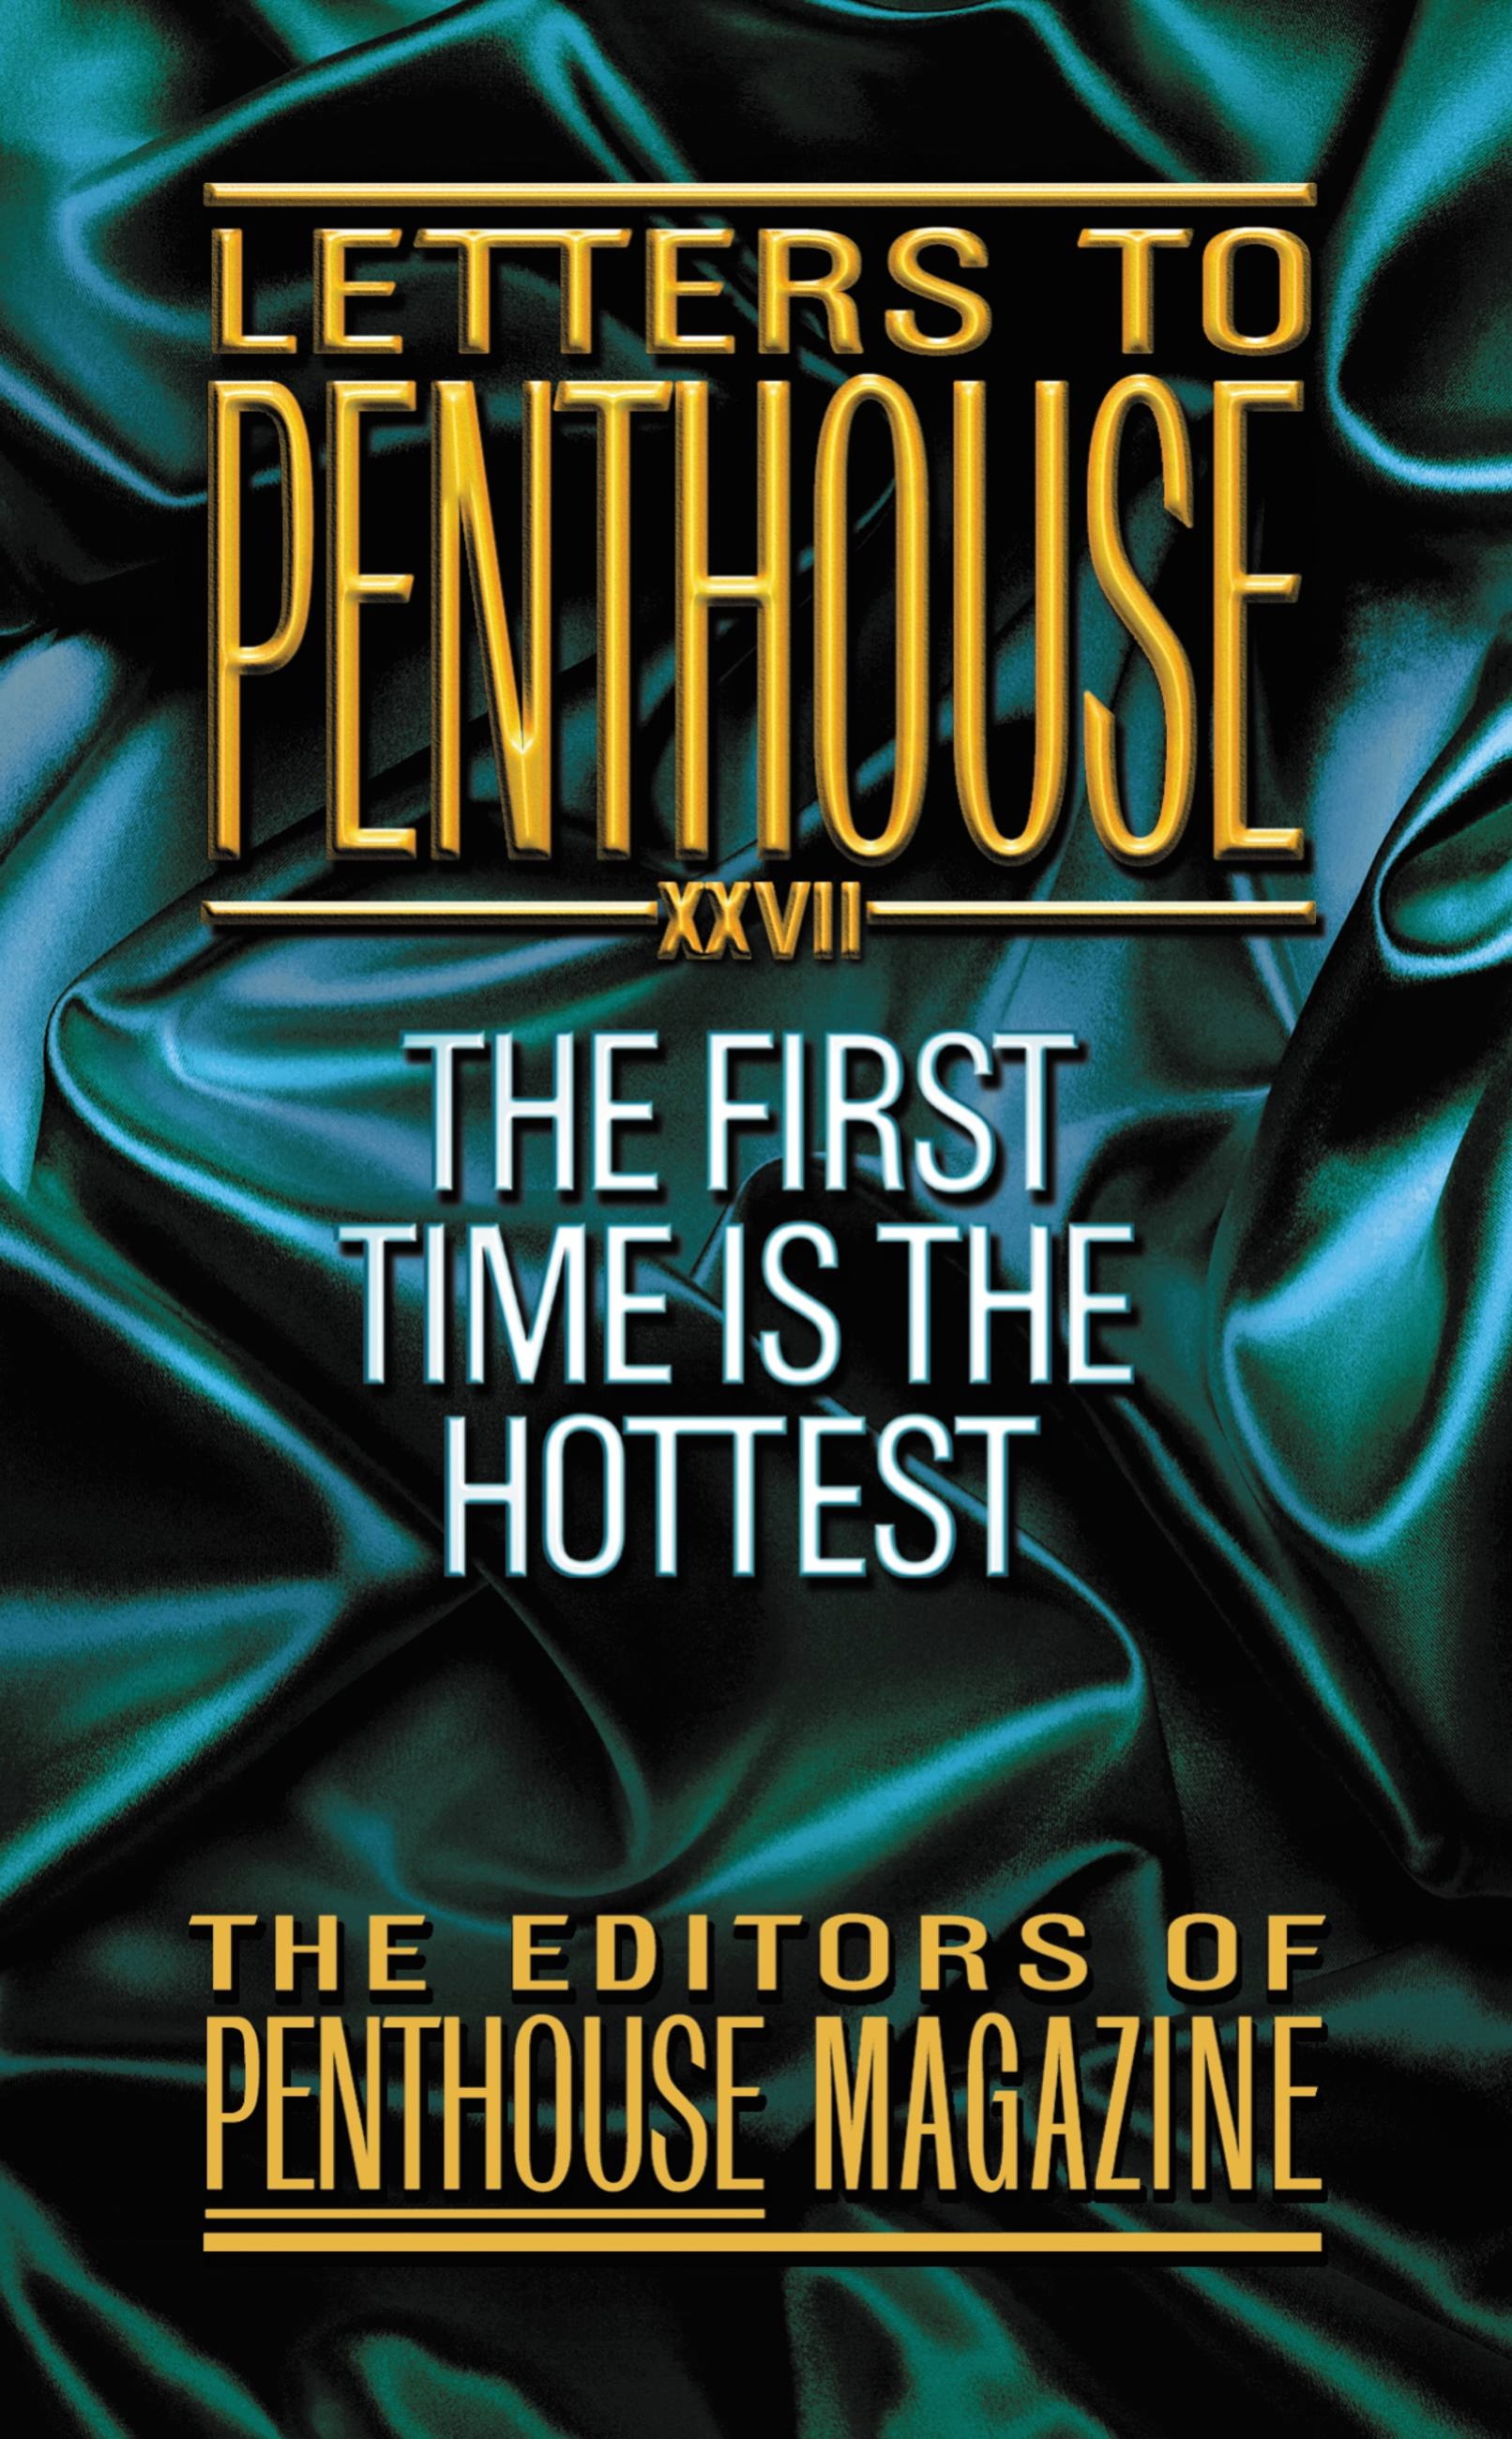 Letters To Penthouse Xxvii By Penthouse International Hachette Book Group 4239